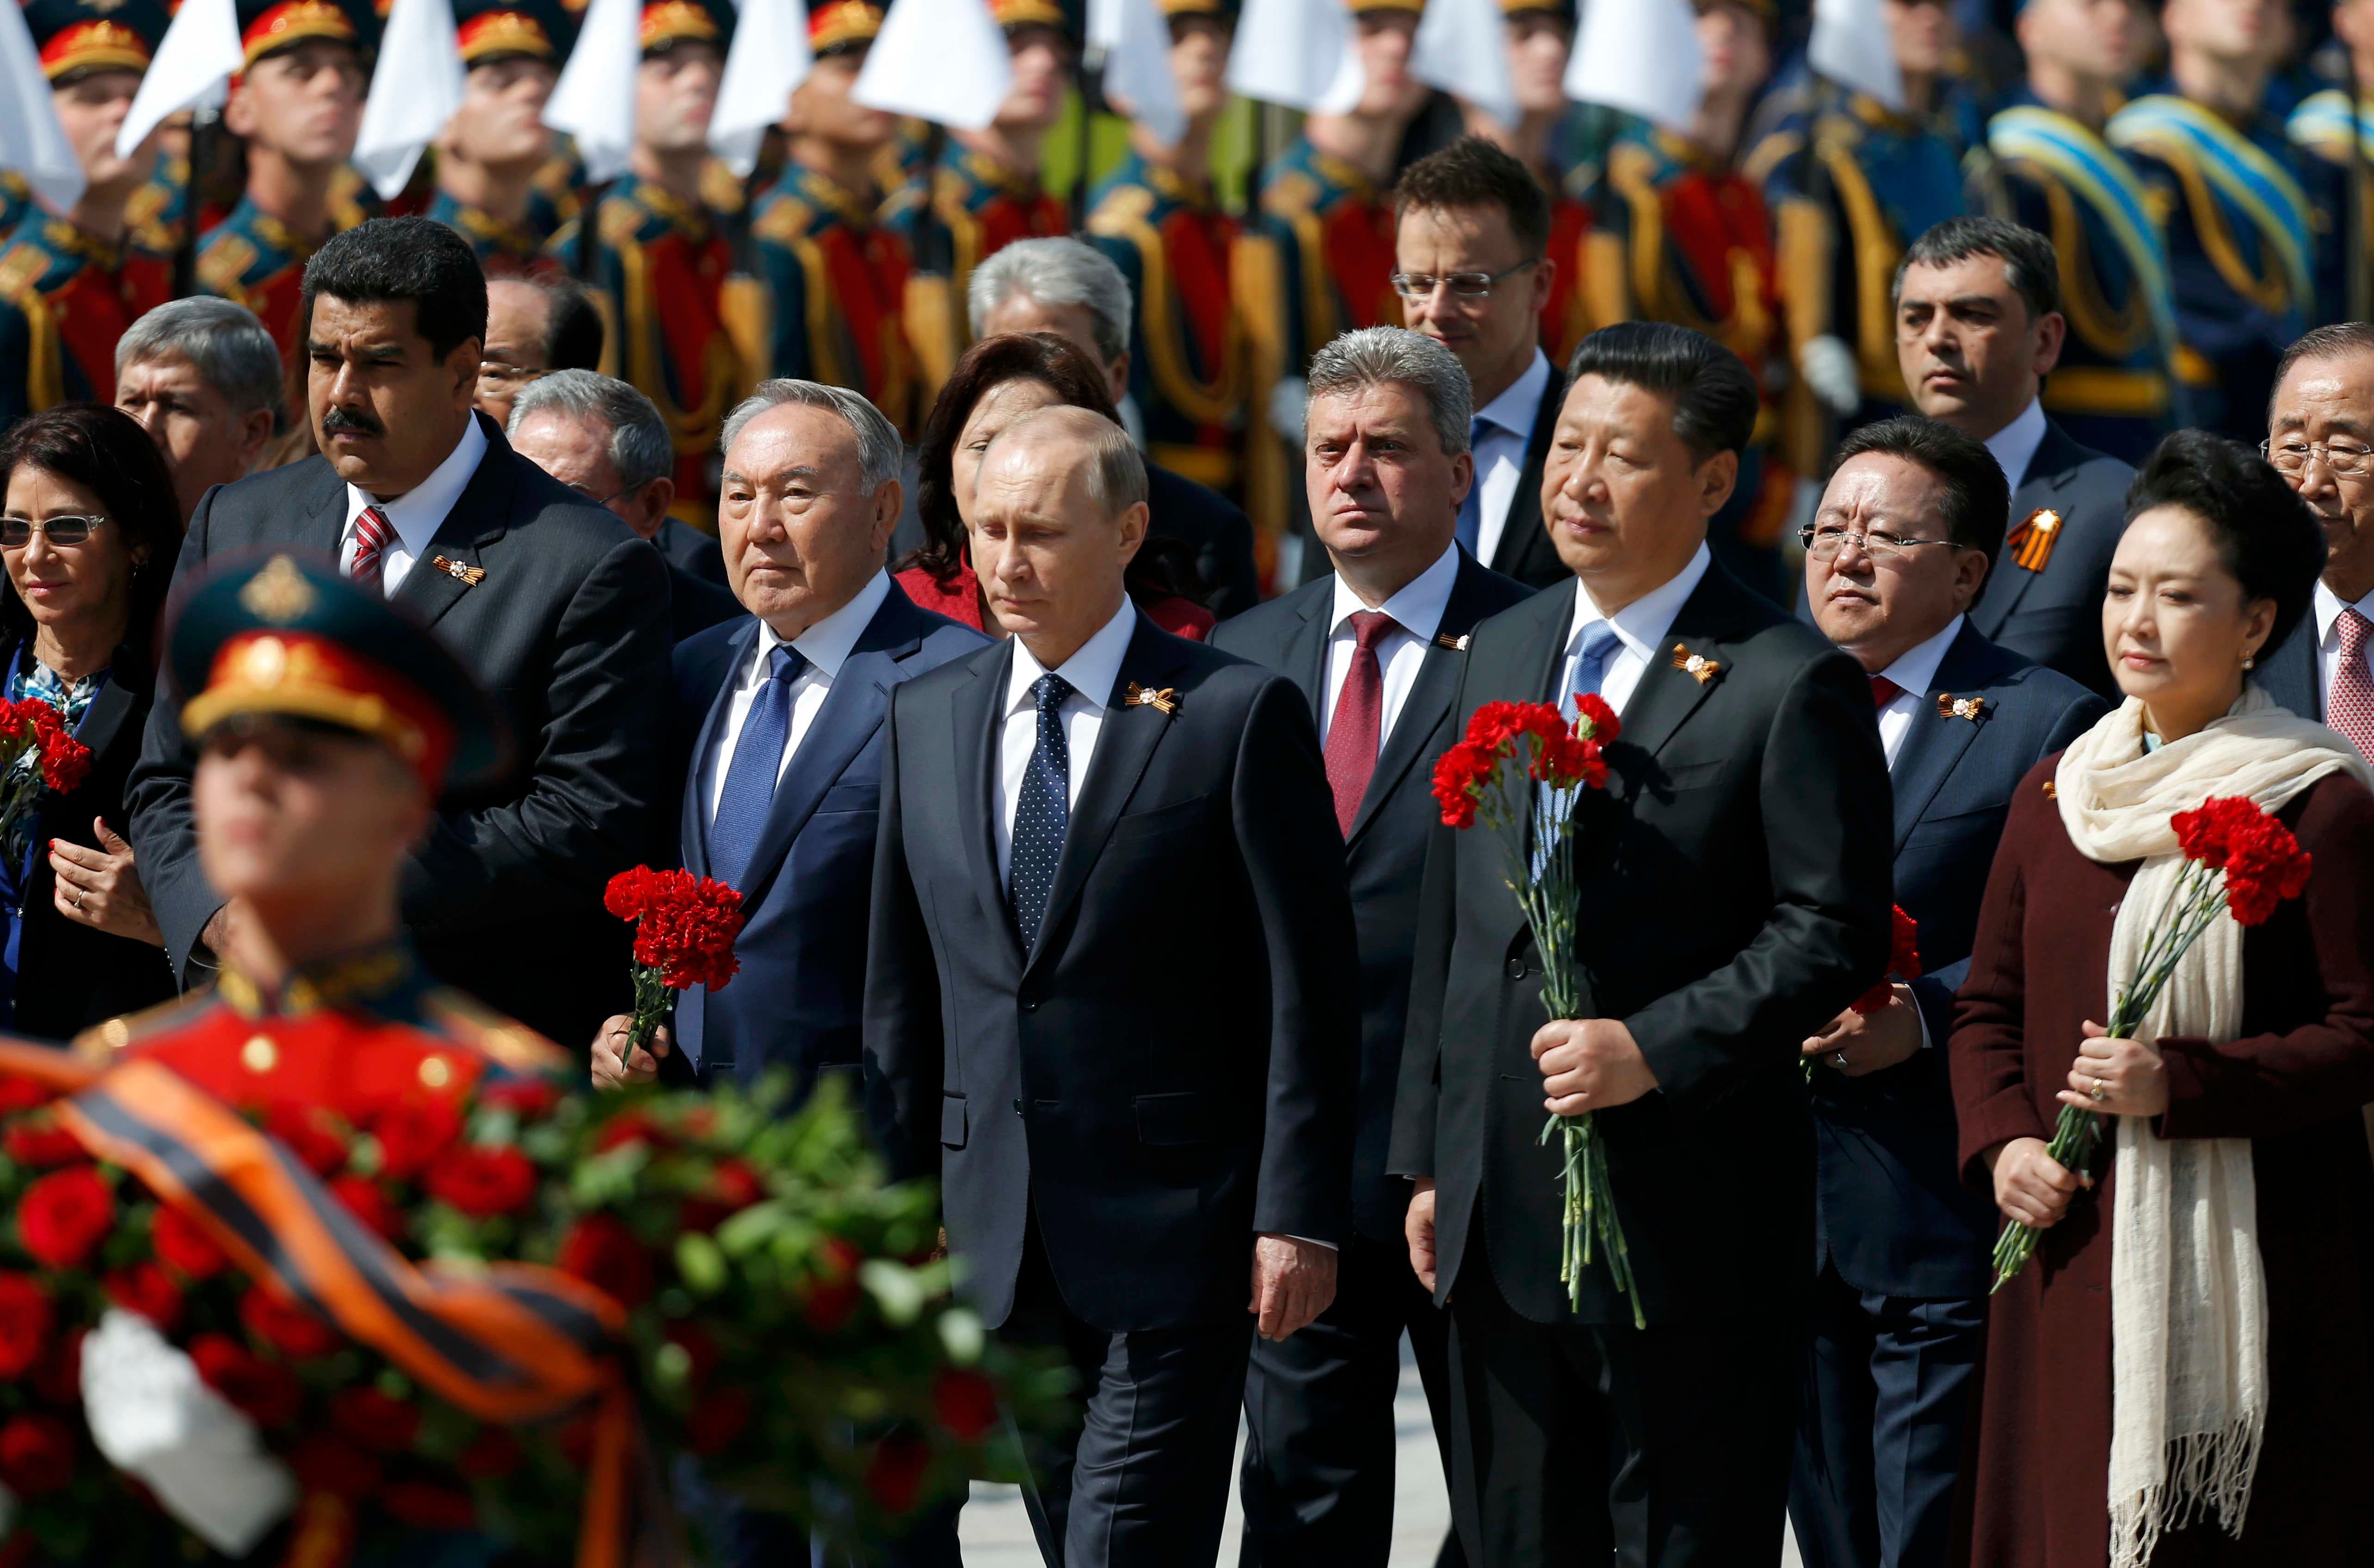 Russia marks Victory Day 